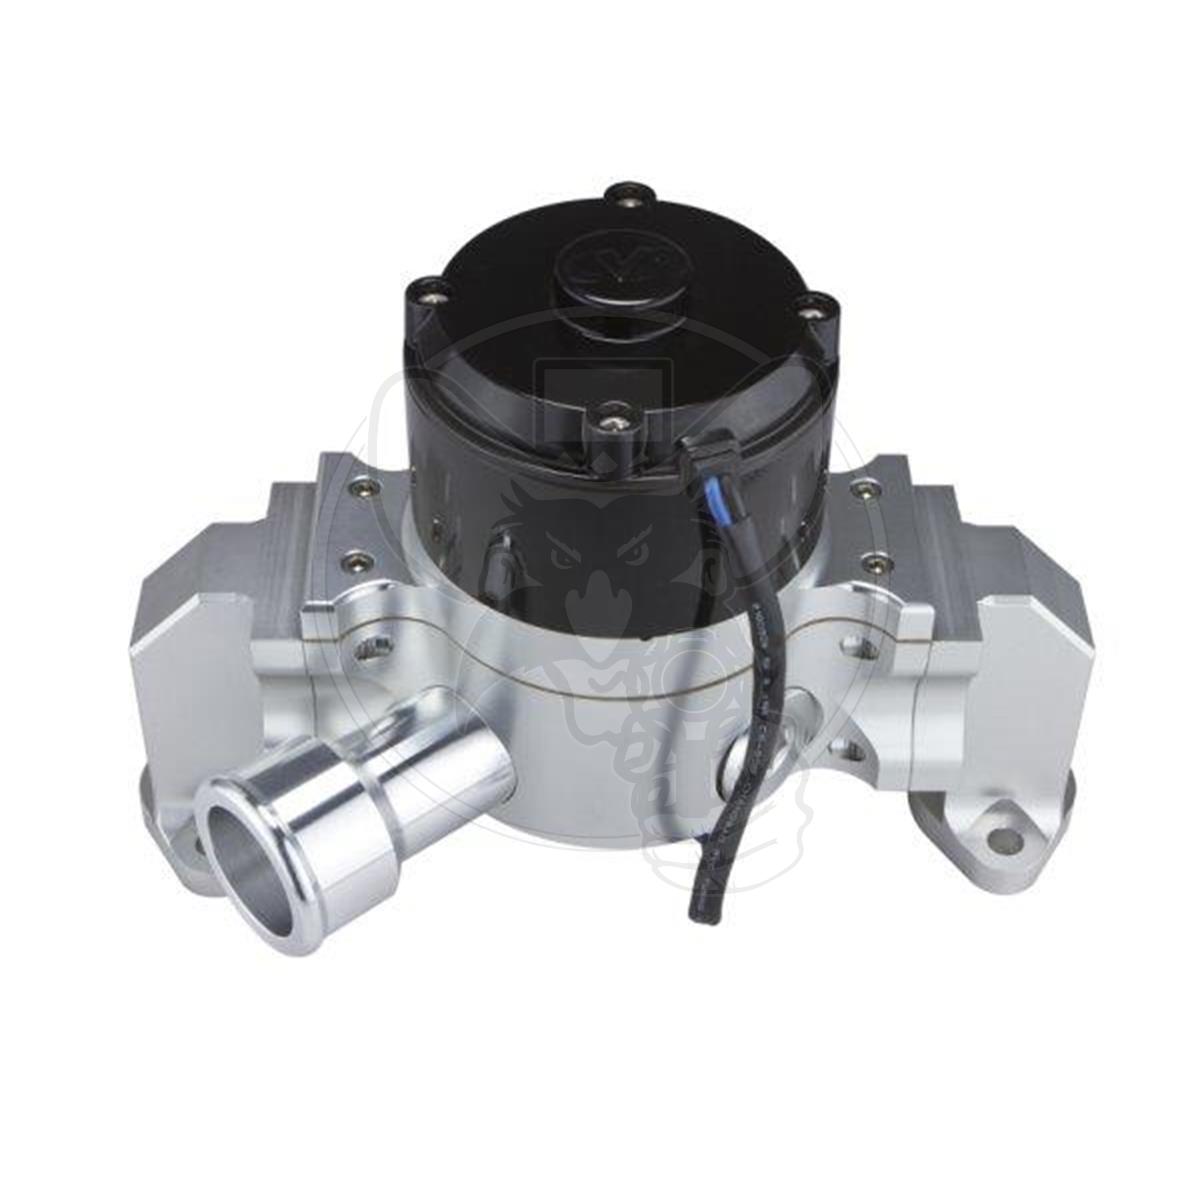 CVR PROFLO EXTREME ELECTRIC WATER PUMP FITS SMALL BLOCK CHEV 55 GPM - CLEAR